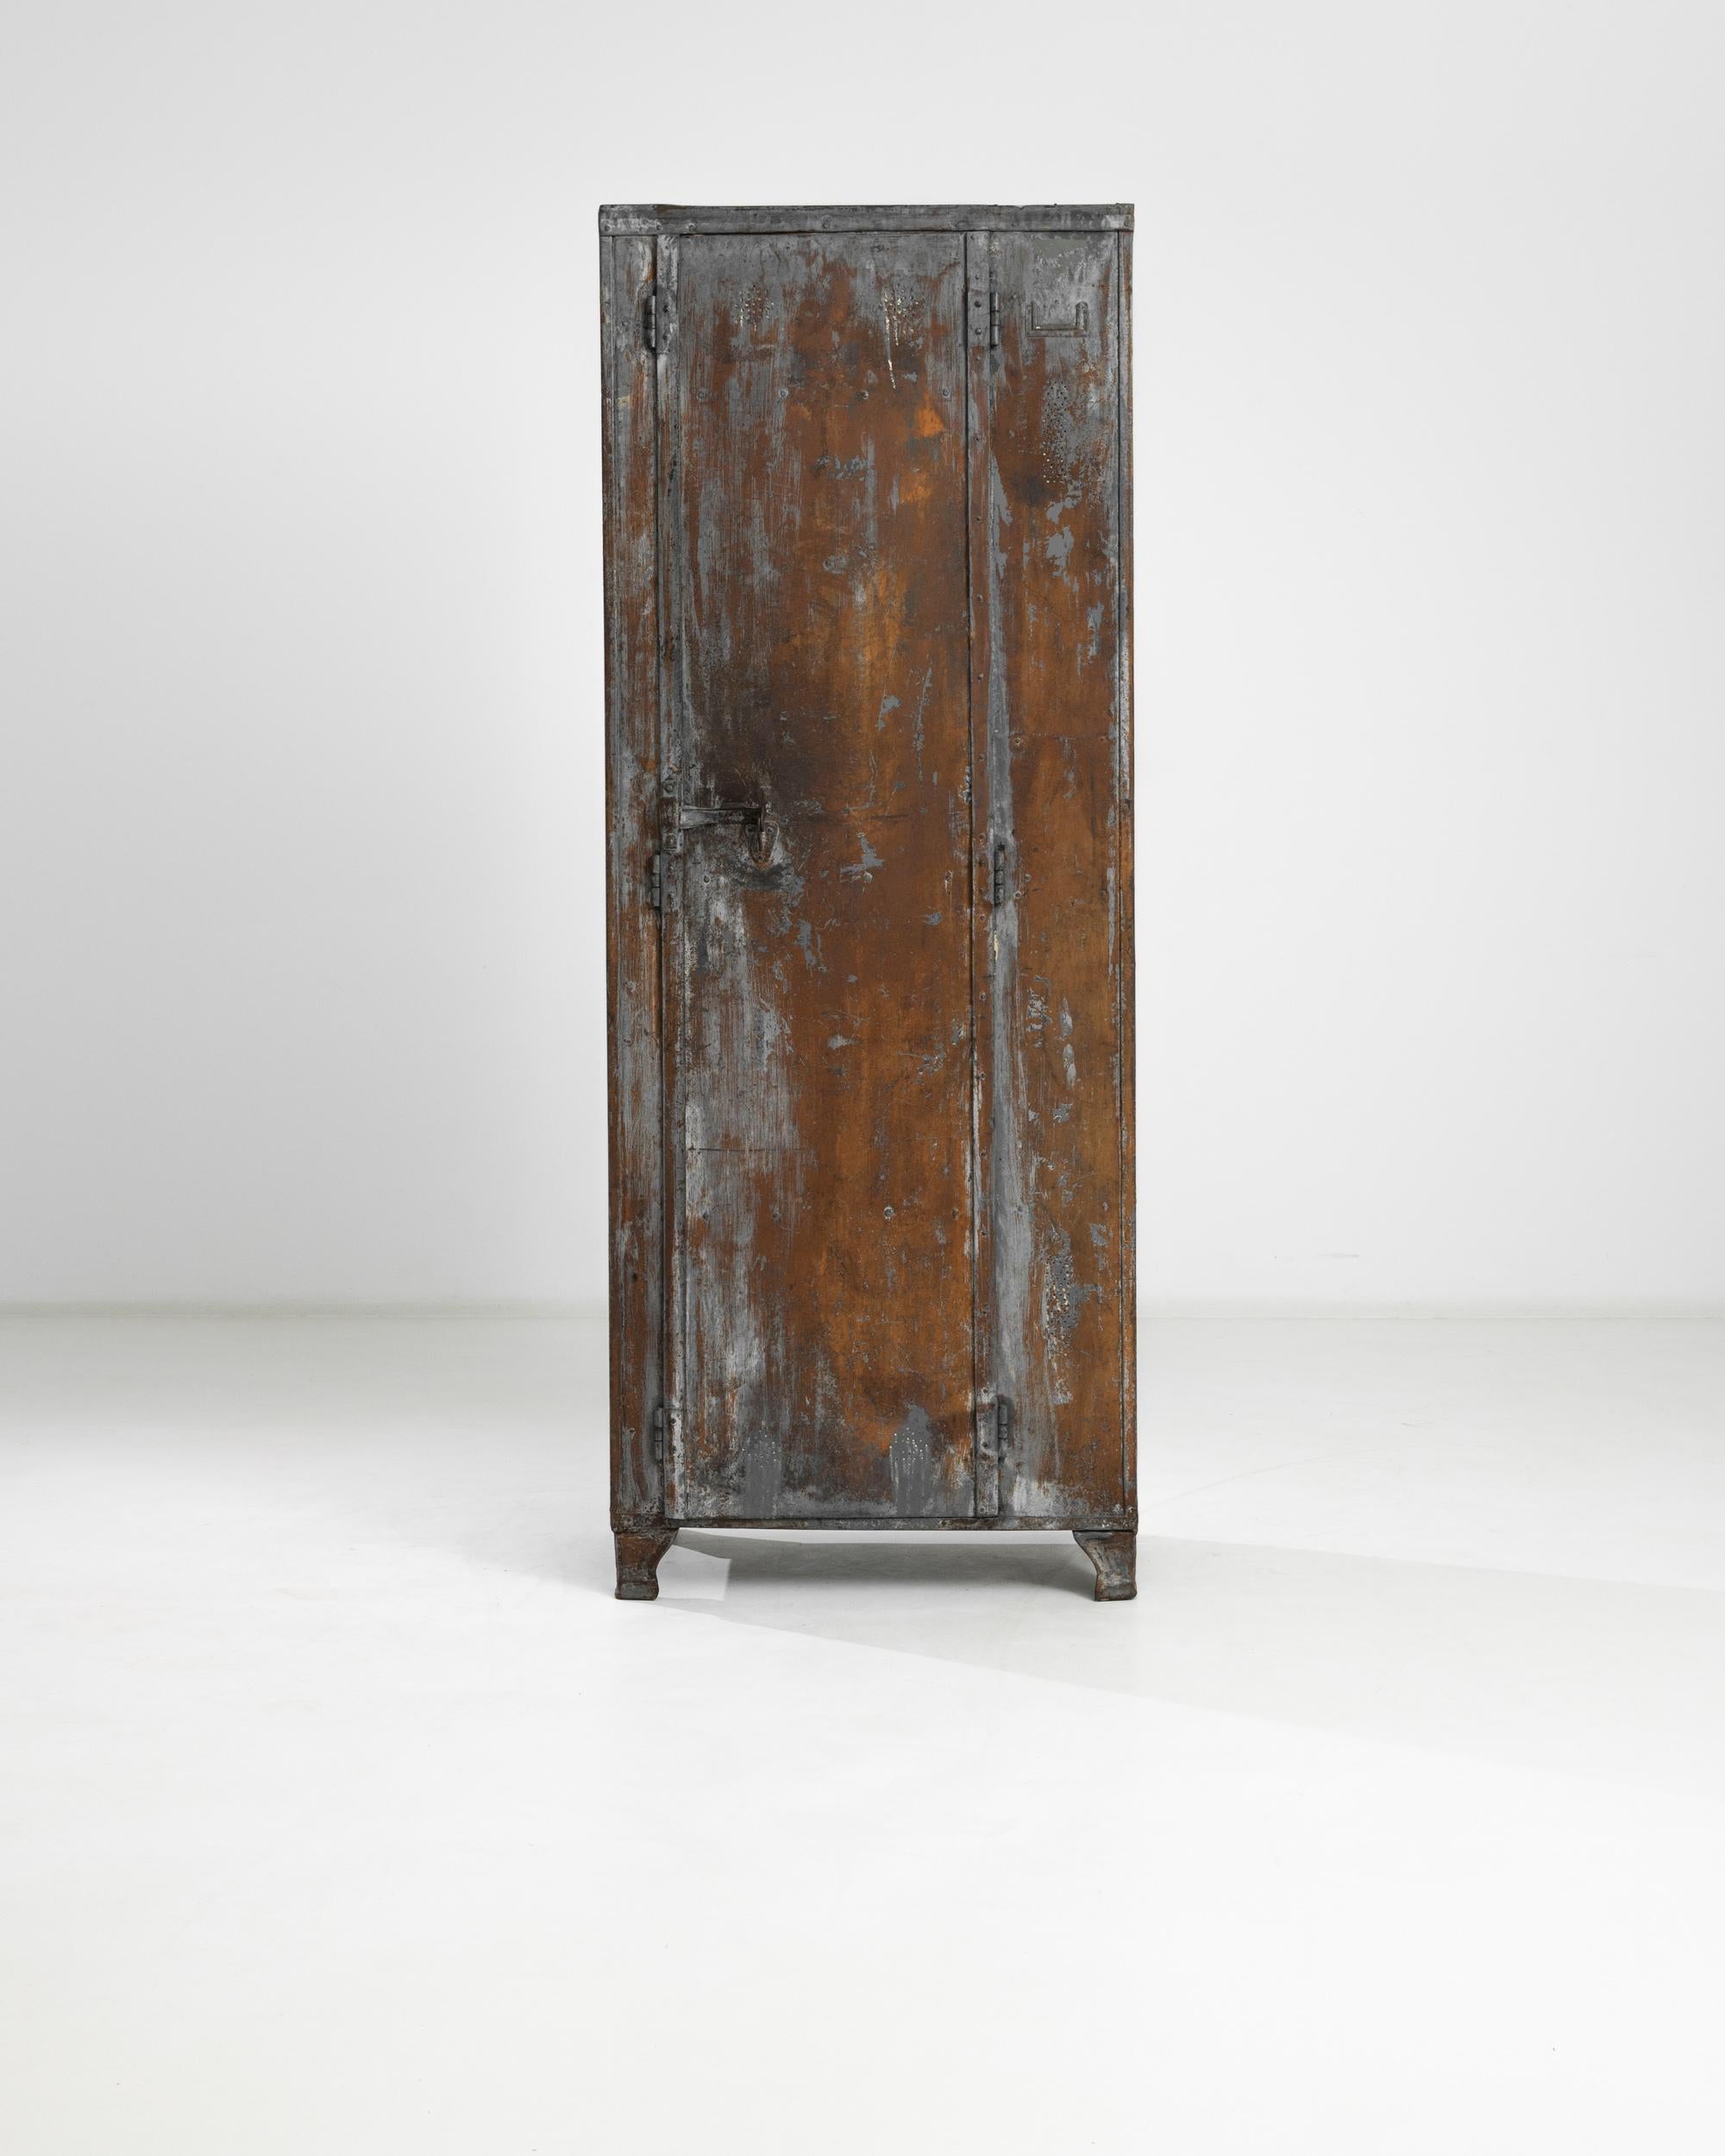 This 1940s French Metal Cabinet exudes a robust, industrial charm that's hard to find in modern furniture. Its distressed patina tells a story of years gone by, adding an authentic vintage appeal to any space. Standing tall on sturdy legs, this